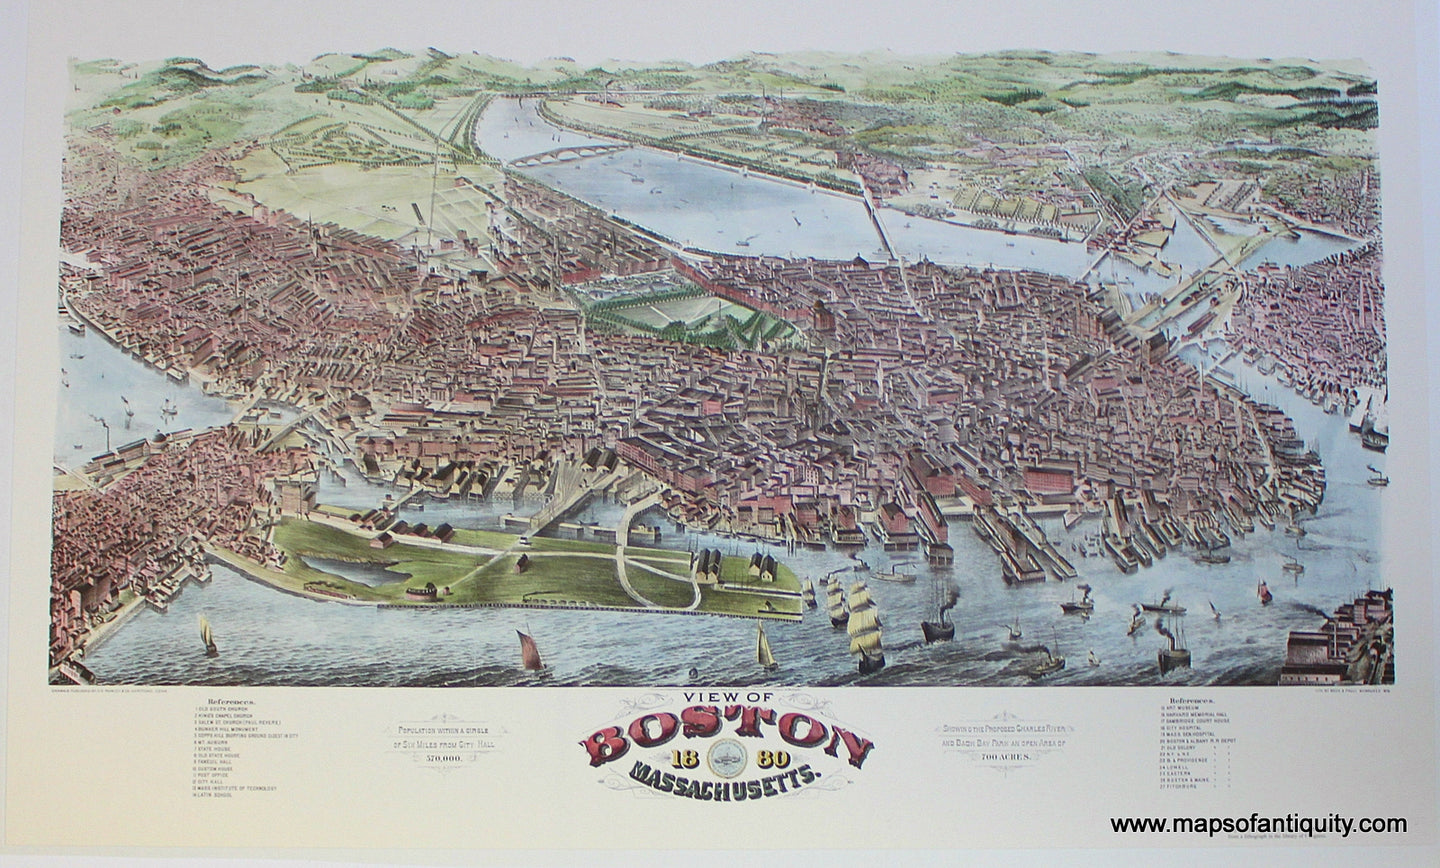 Reproduction-View-of-Boston-Massachusetts-1880---Reproduction---Reproductions-Other-Reproductions-Reproduction-Rowley-Maps-Of-Antiquity